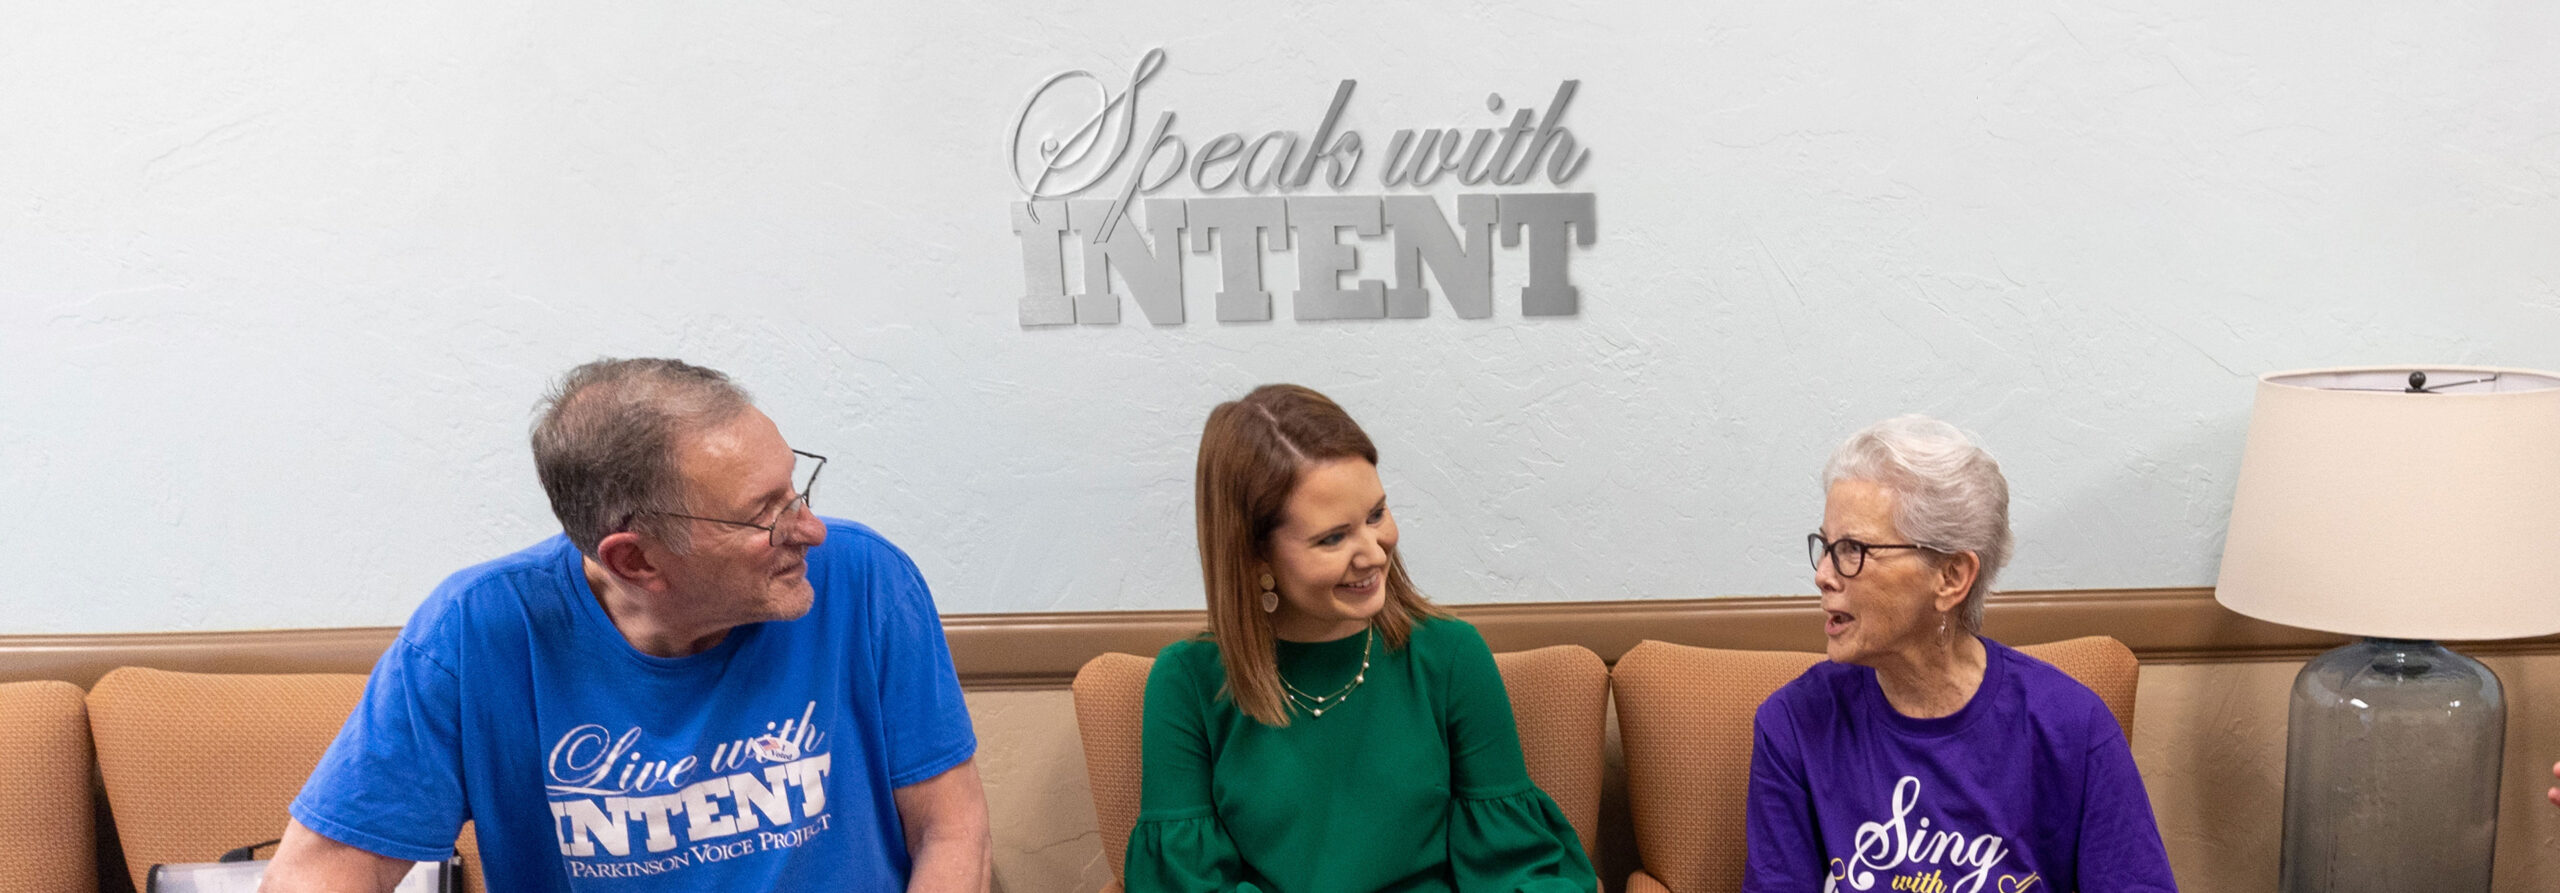 Three people talking in the Parkinson Voice Project headquarters under a sign that says "Speak with INTENT"